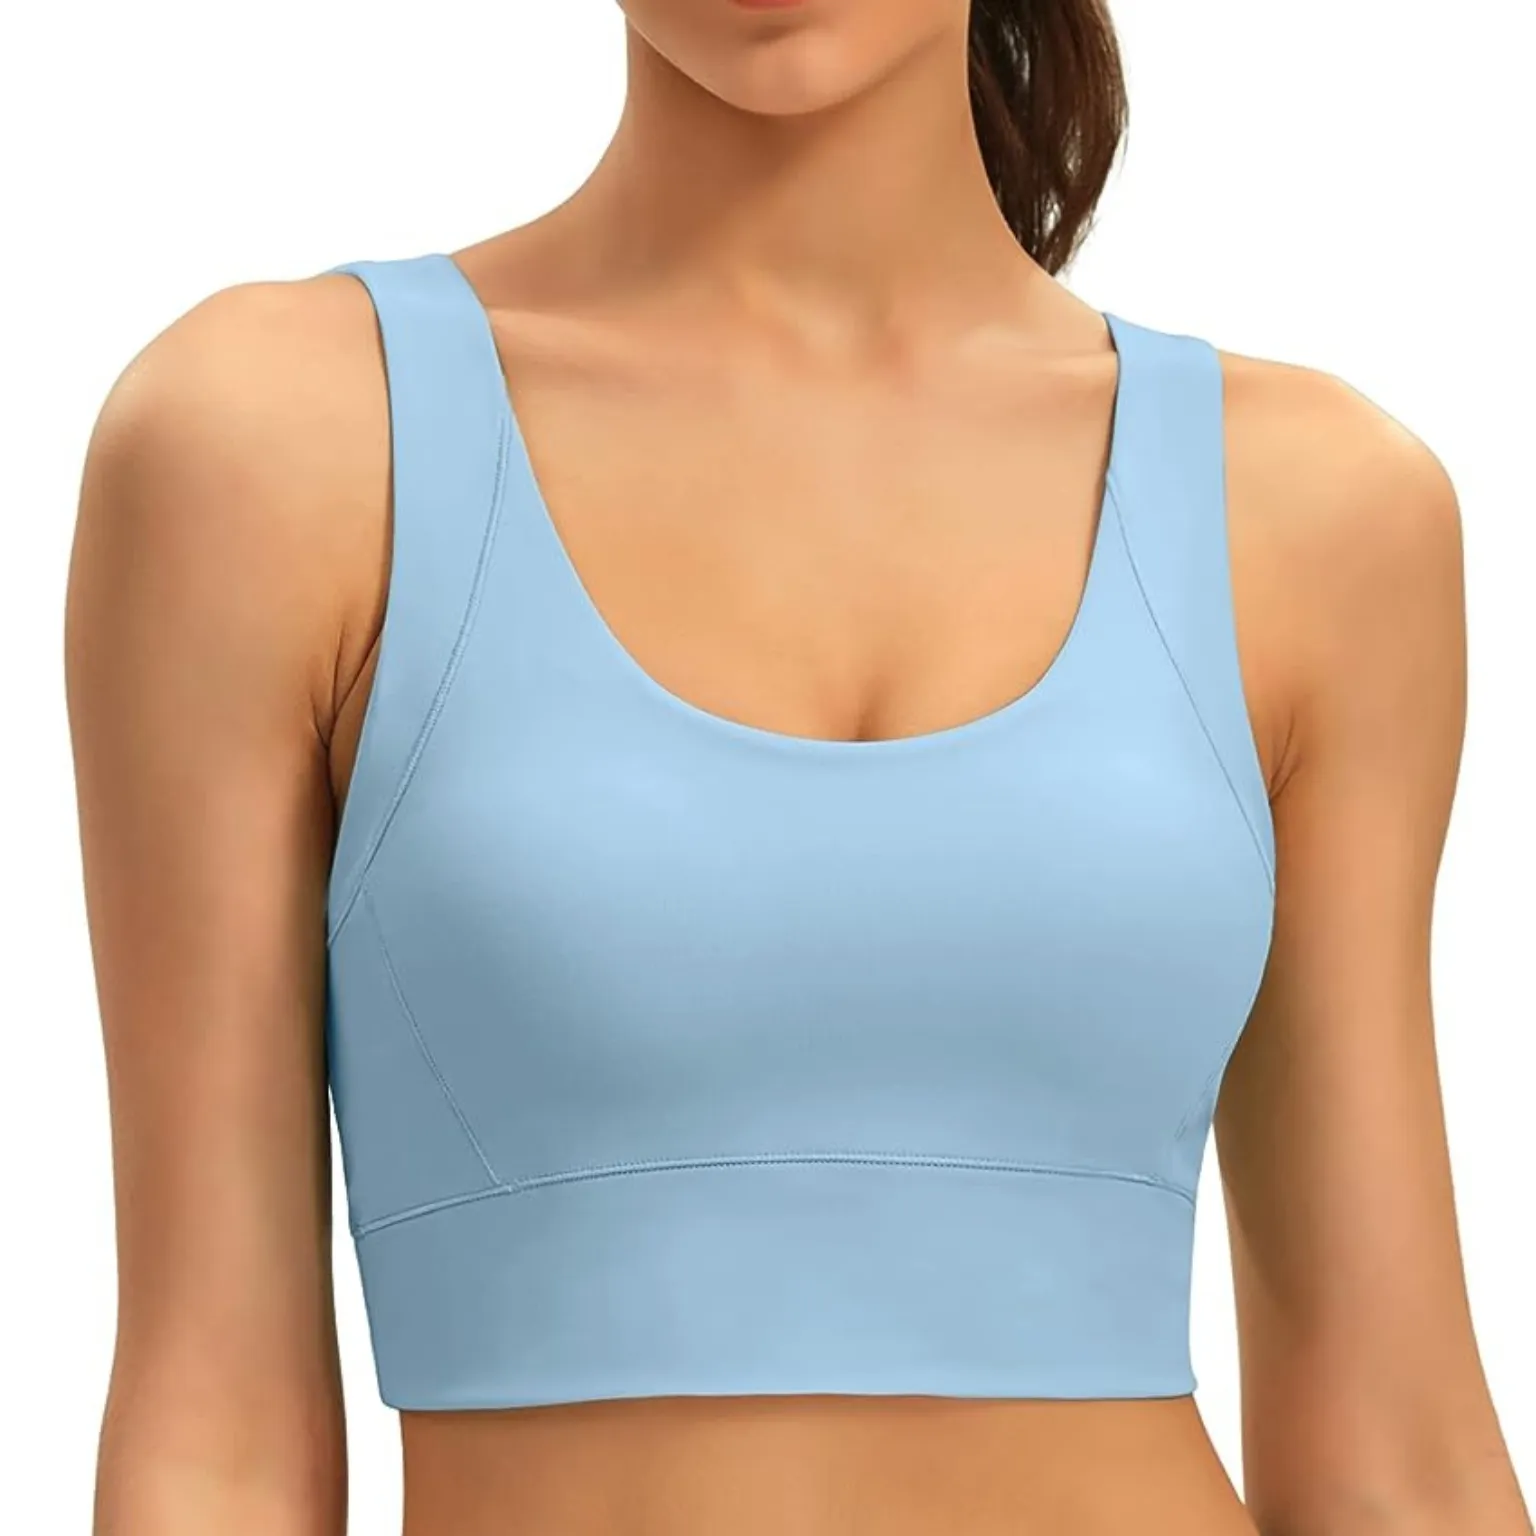 Padded Sports Bra Manufacturing with superior quality